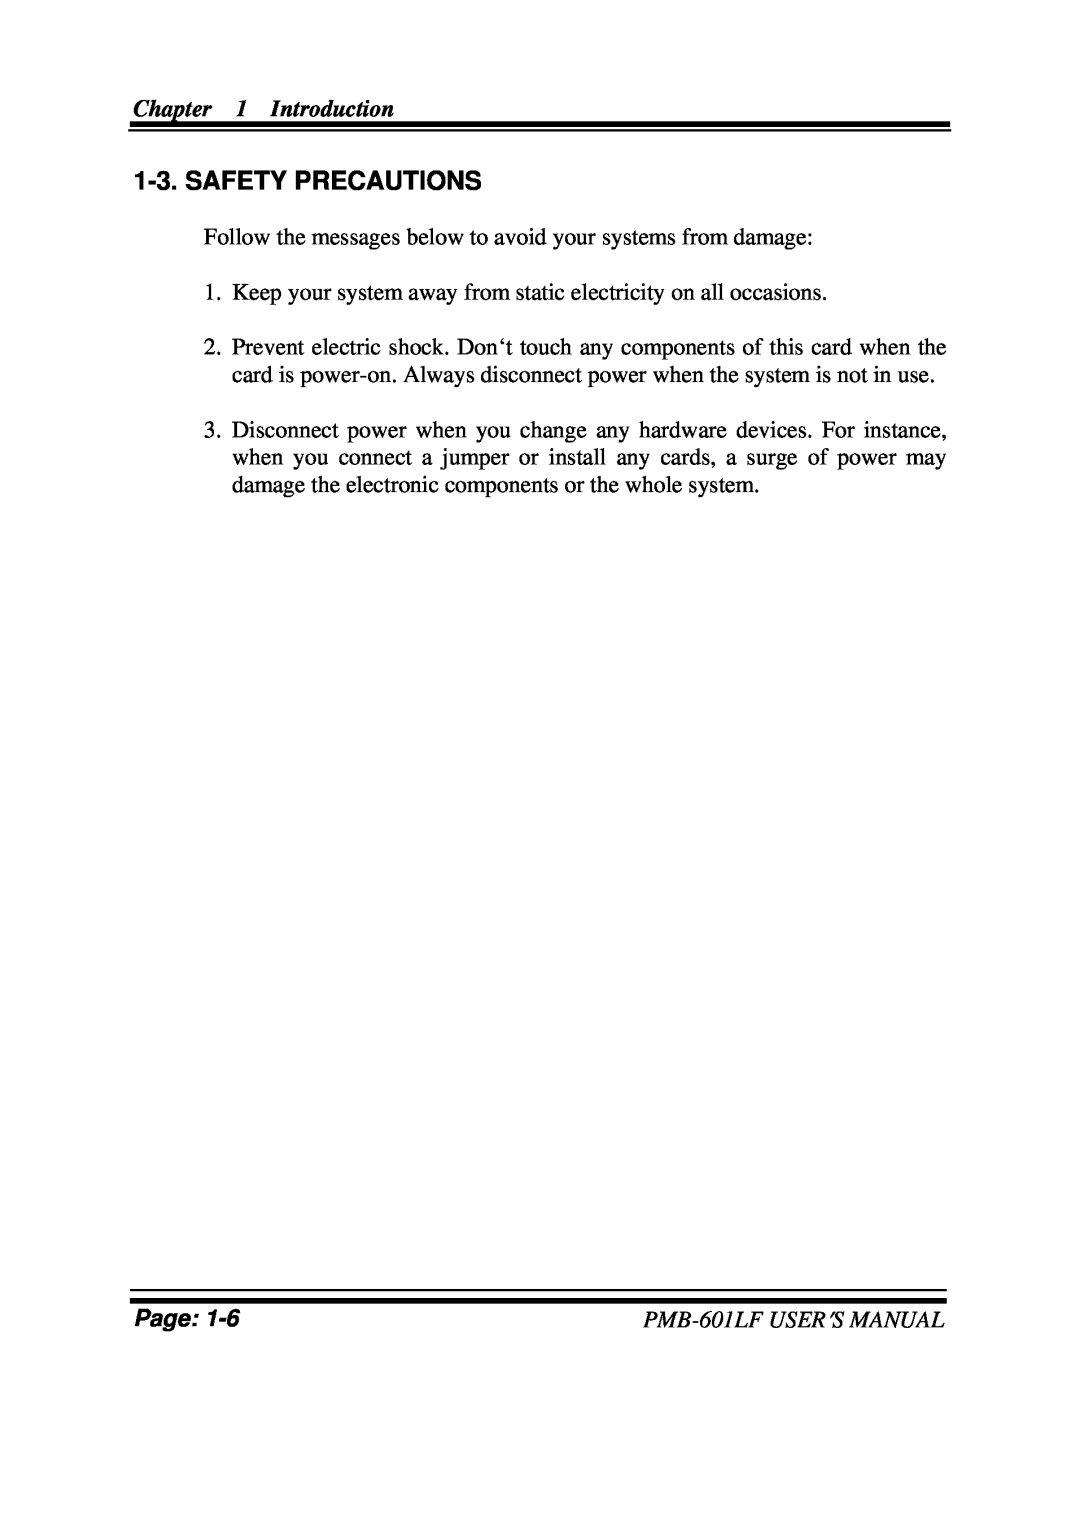 Intel user manual Safety Precautions, Introduction, Page, PMB-601LFUSER′S MANUAL 